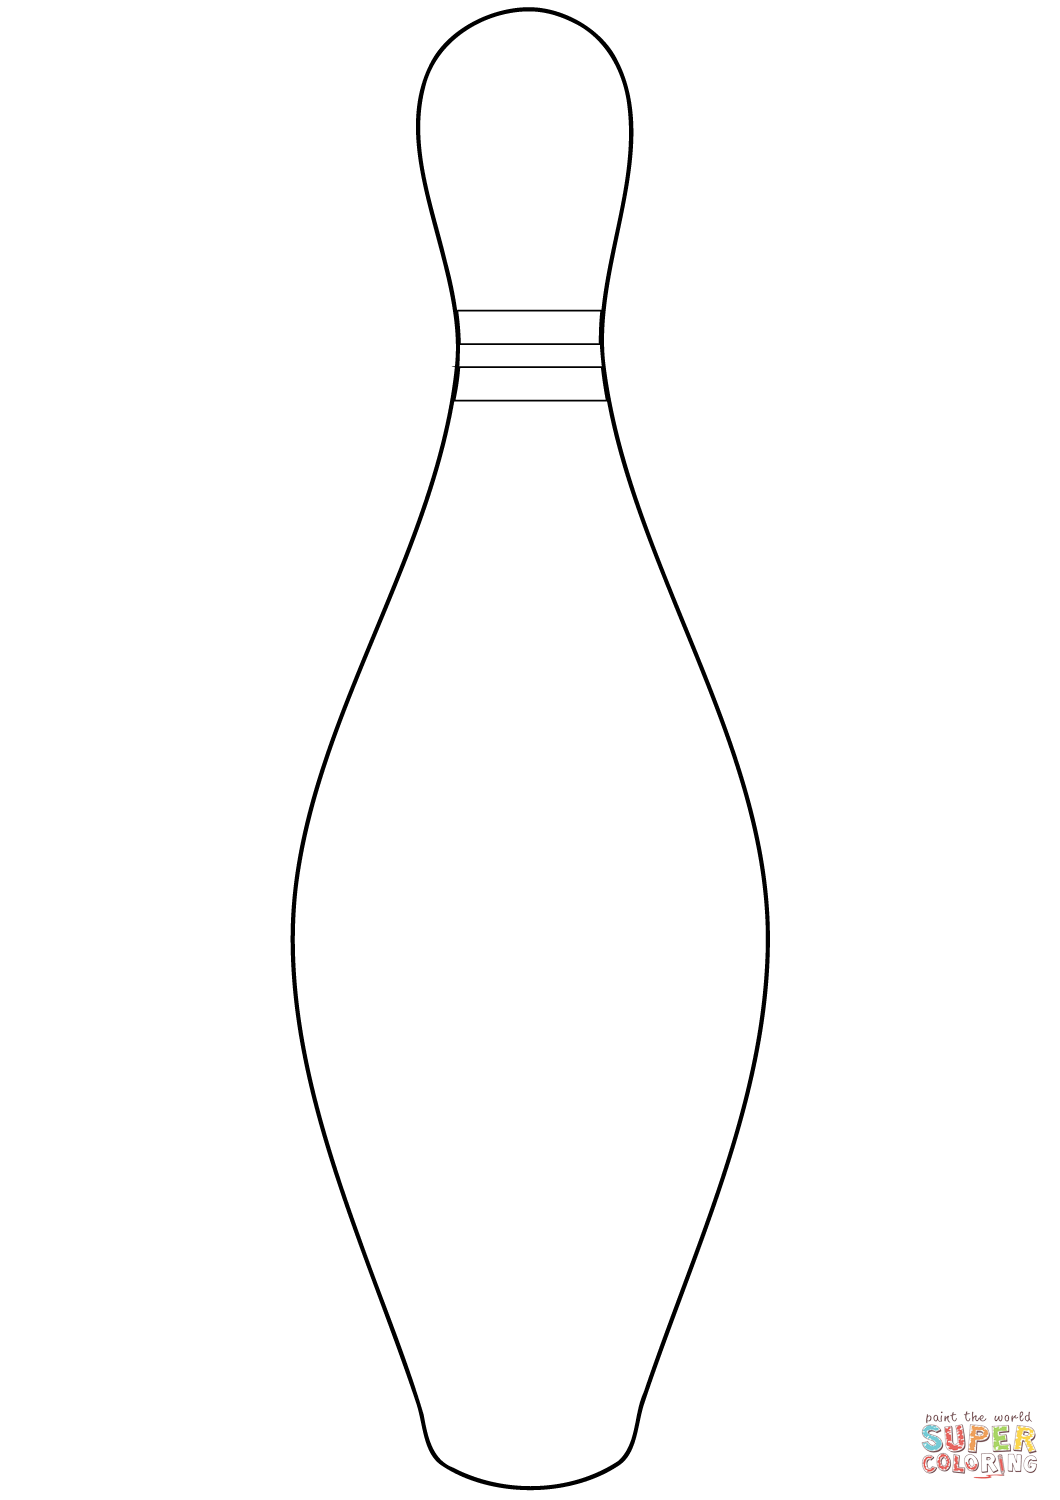 Bowling Pin Coloring Page Free Printable Coloring Pages - Free Printable